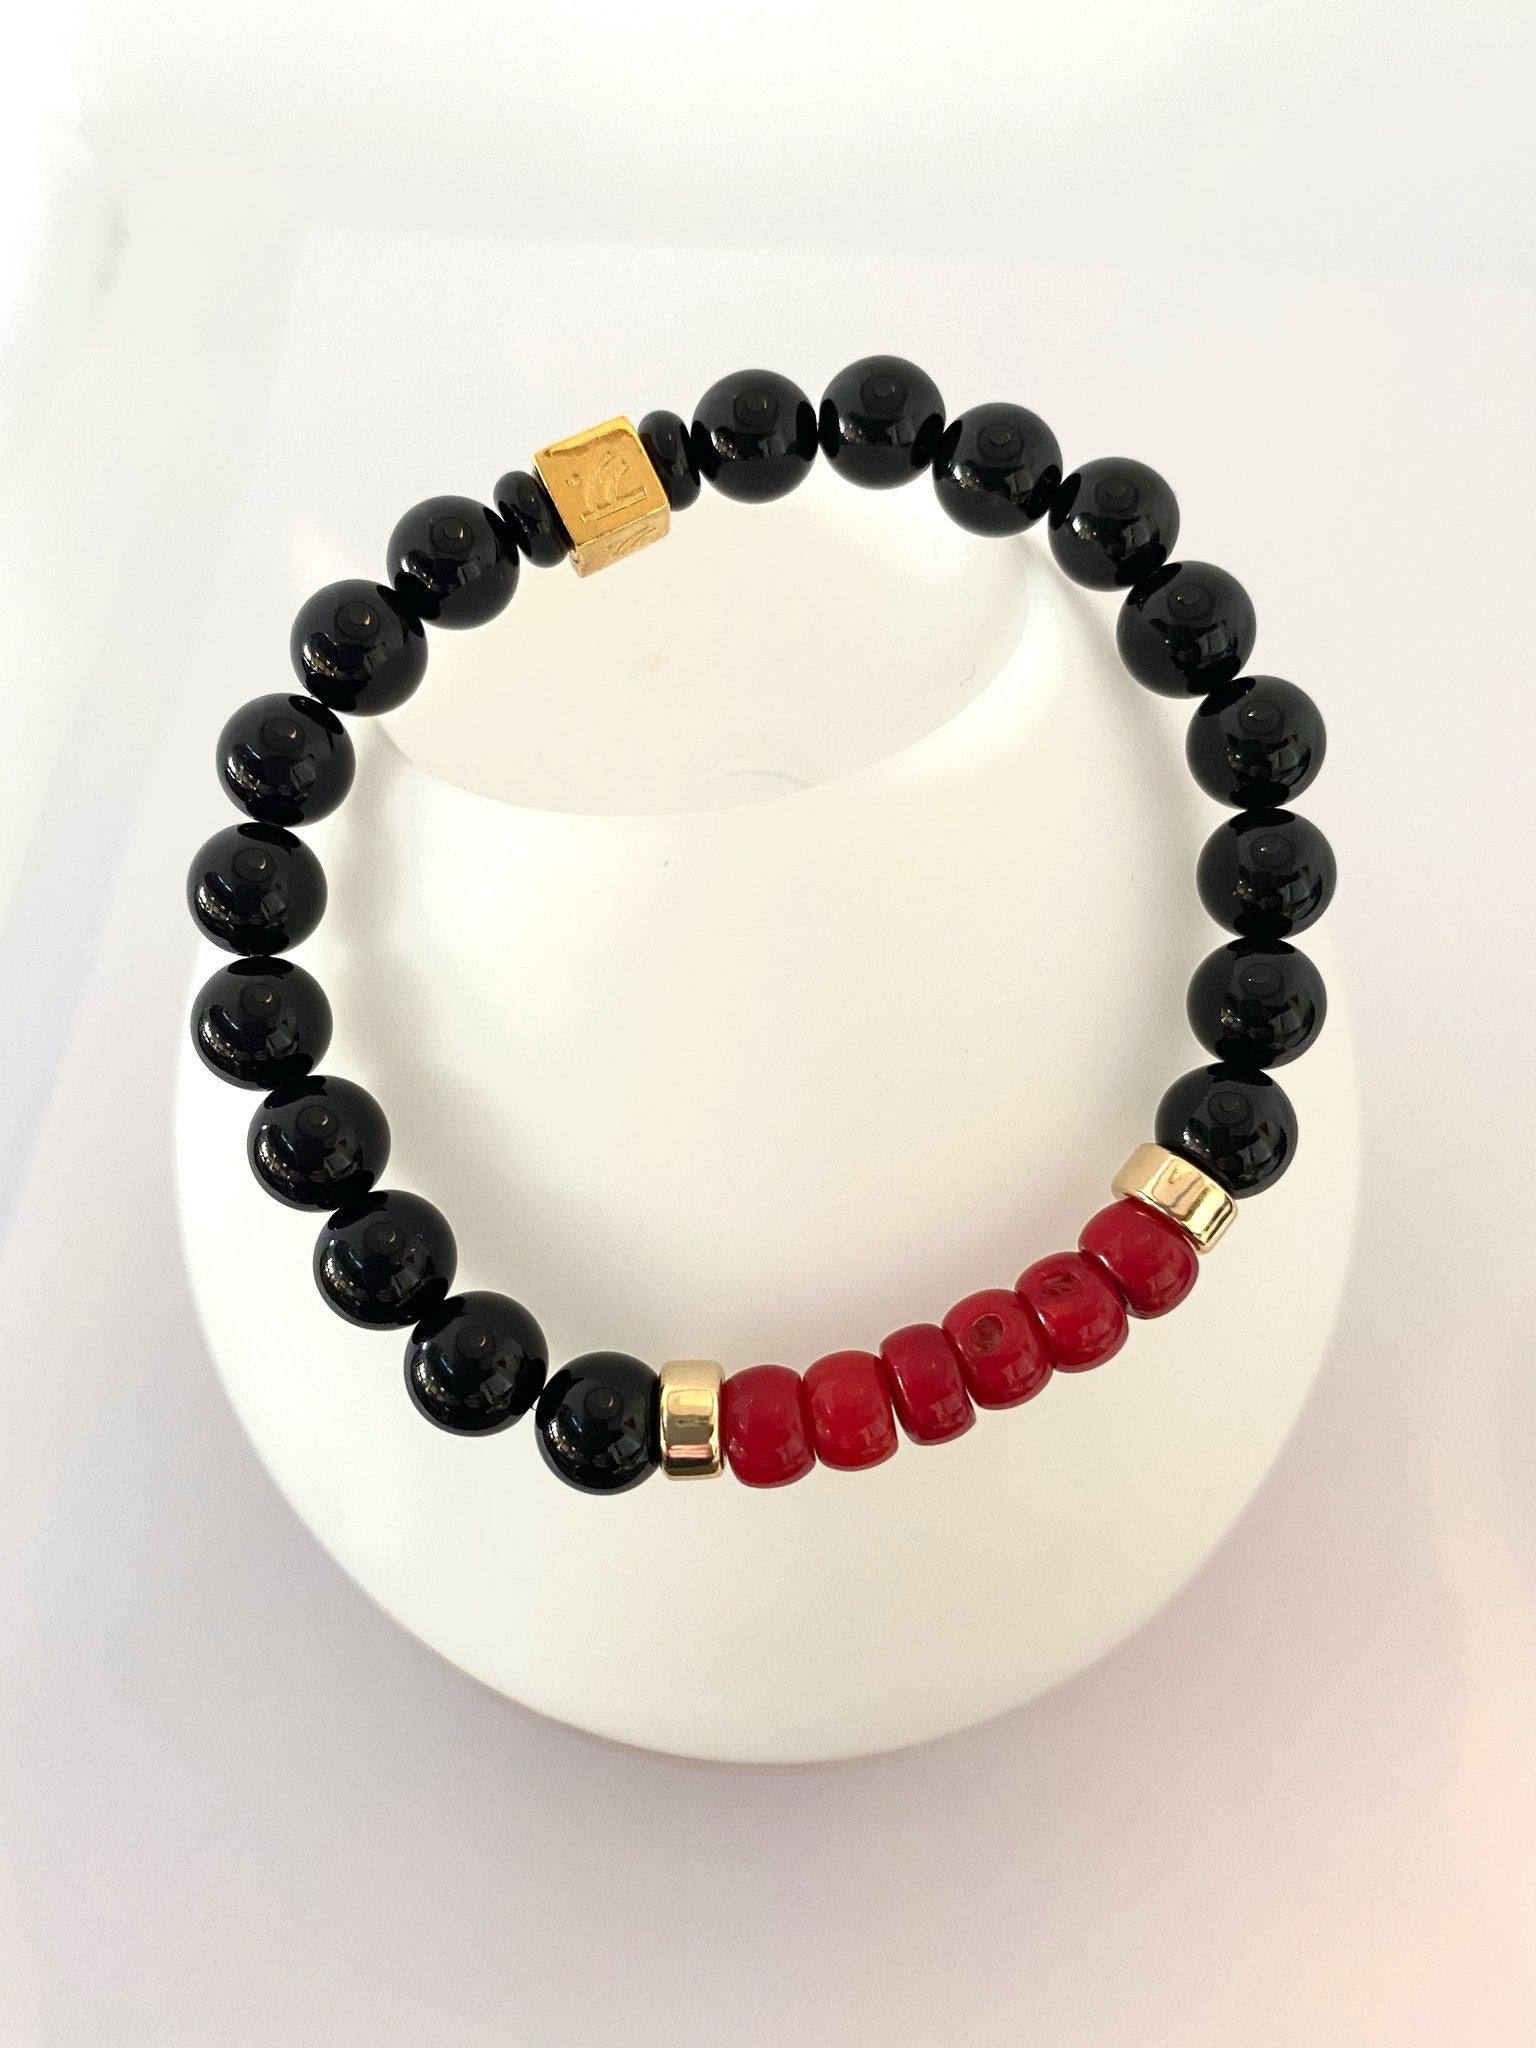 Story Behind the Jewelry:
The 14K gold filled, agate and coral bracelet was designed with round circle stones. Circles are the universal symbol for endless meaning. We have used circles in our Valentines Collection for the a symbol of endless love.